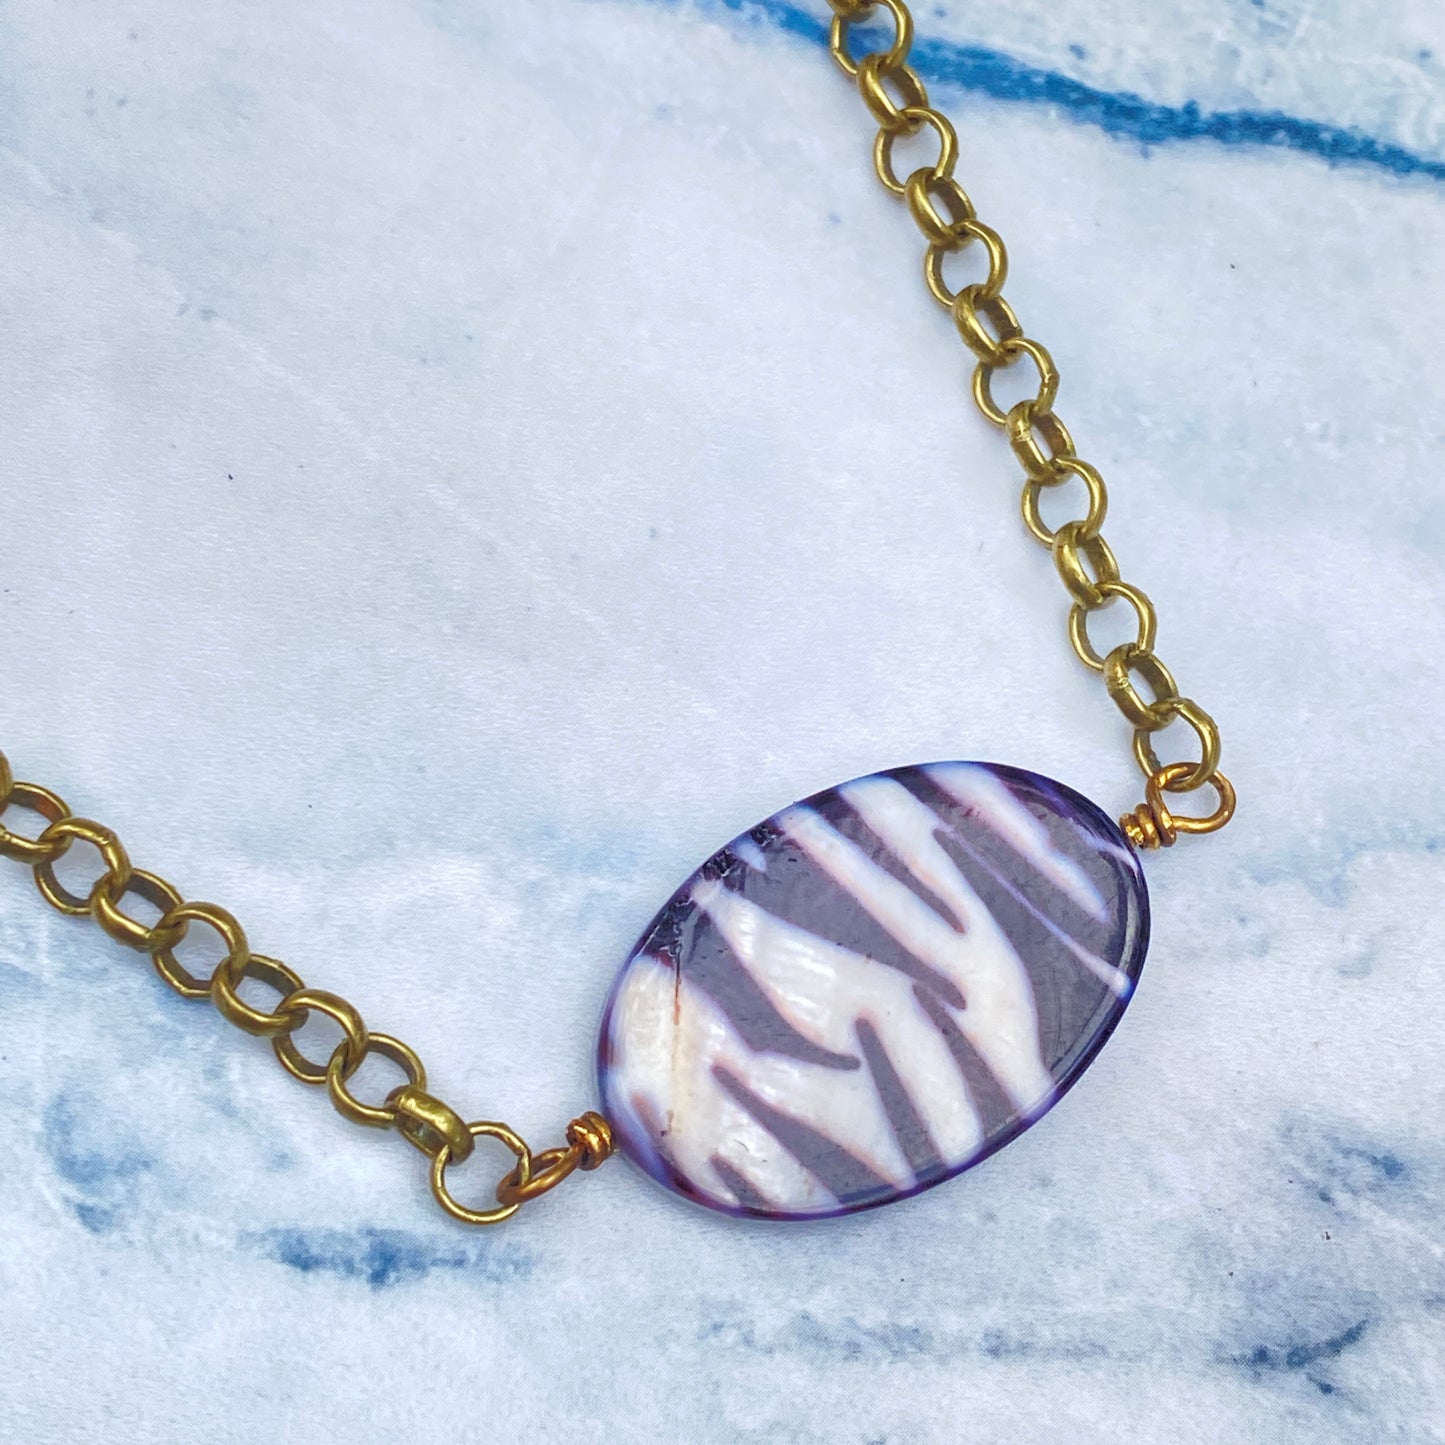 Zebra Print Mother of Pearl Choker/Necklace